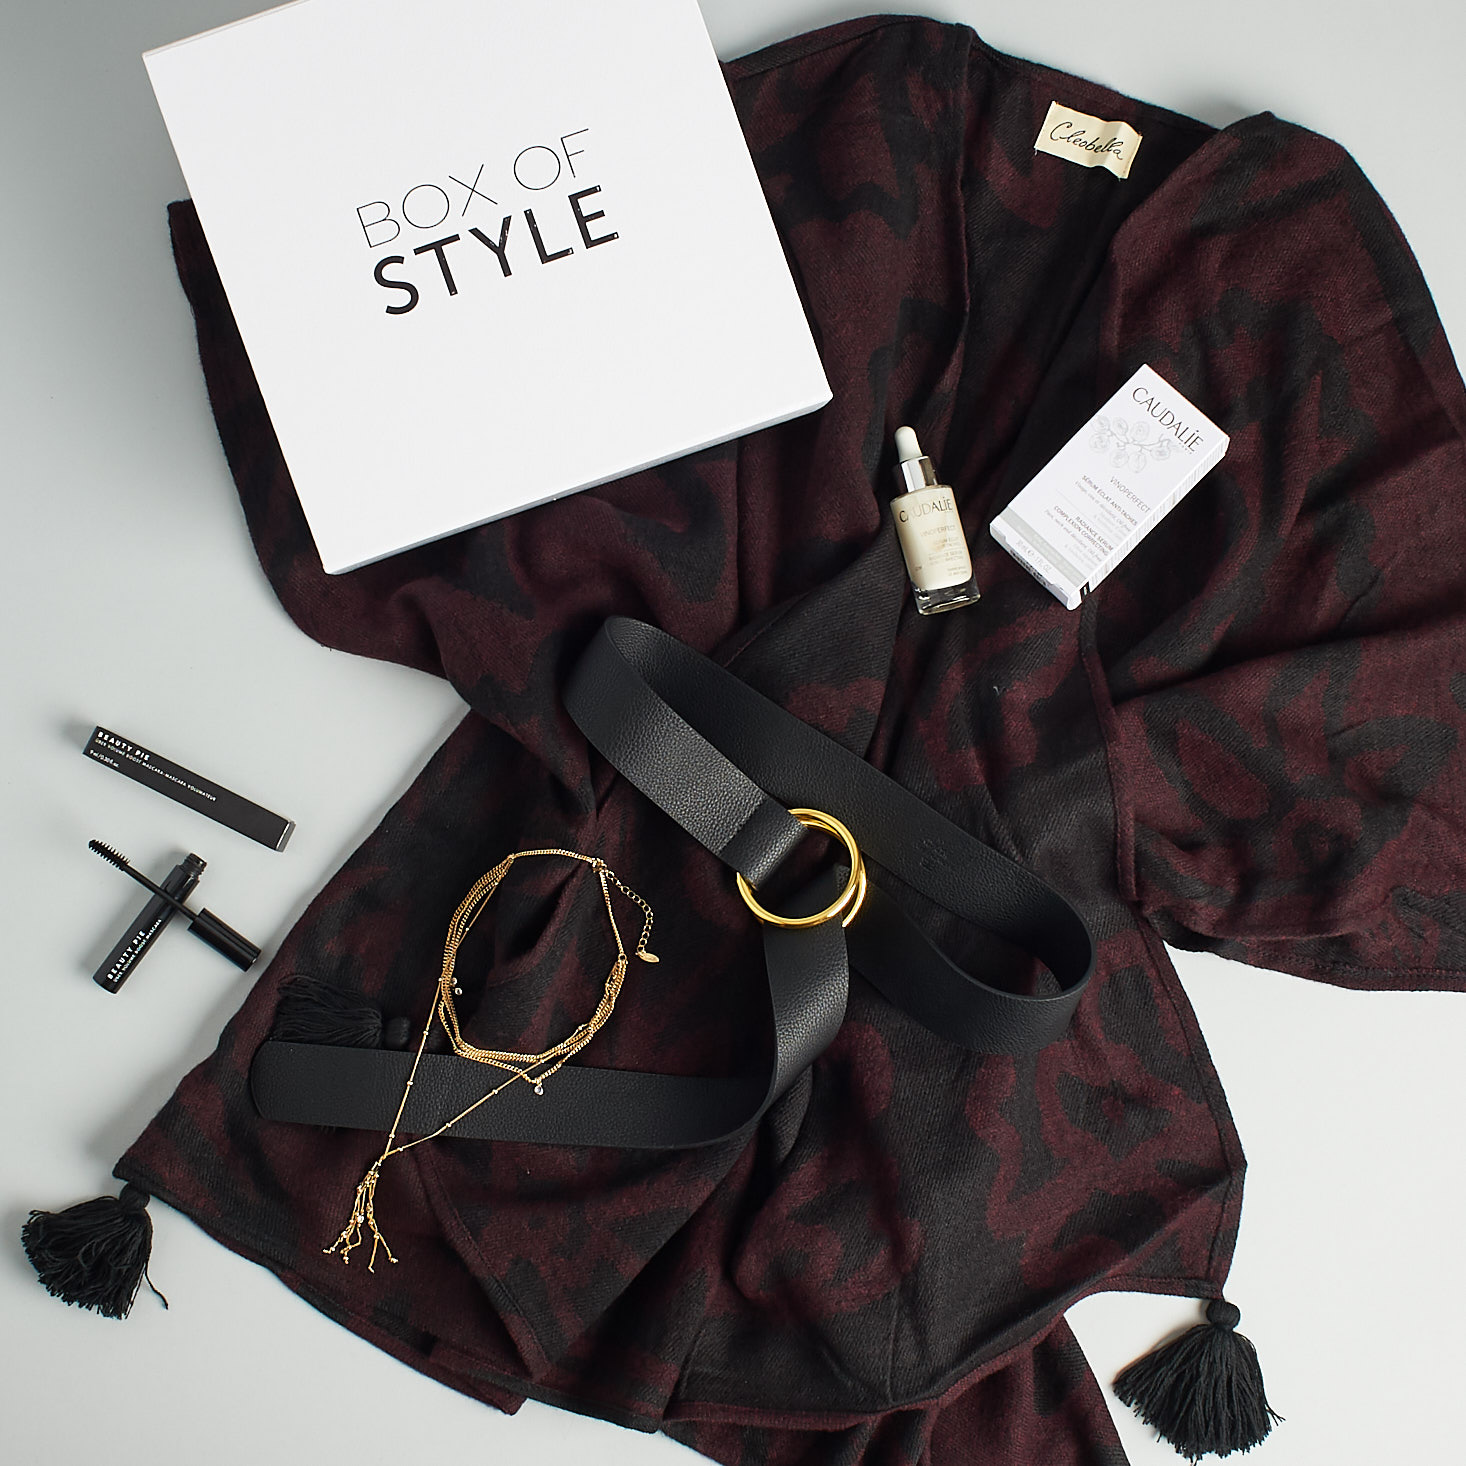 Rachel Zoe Box of Style Fall 2018 Review + $25 Coupon